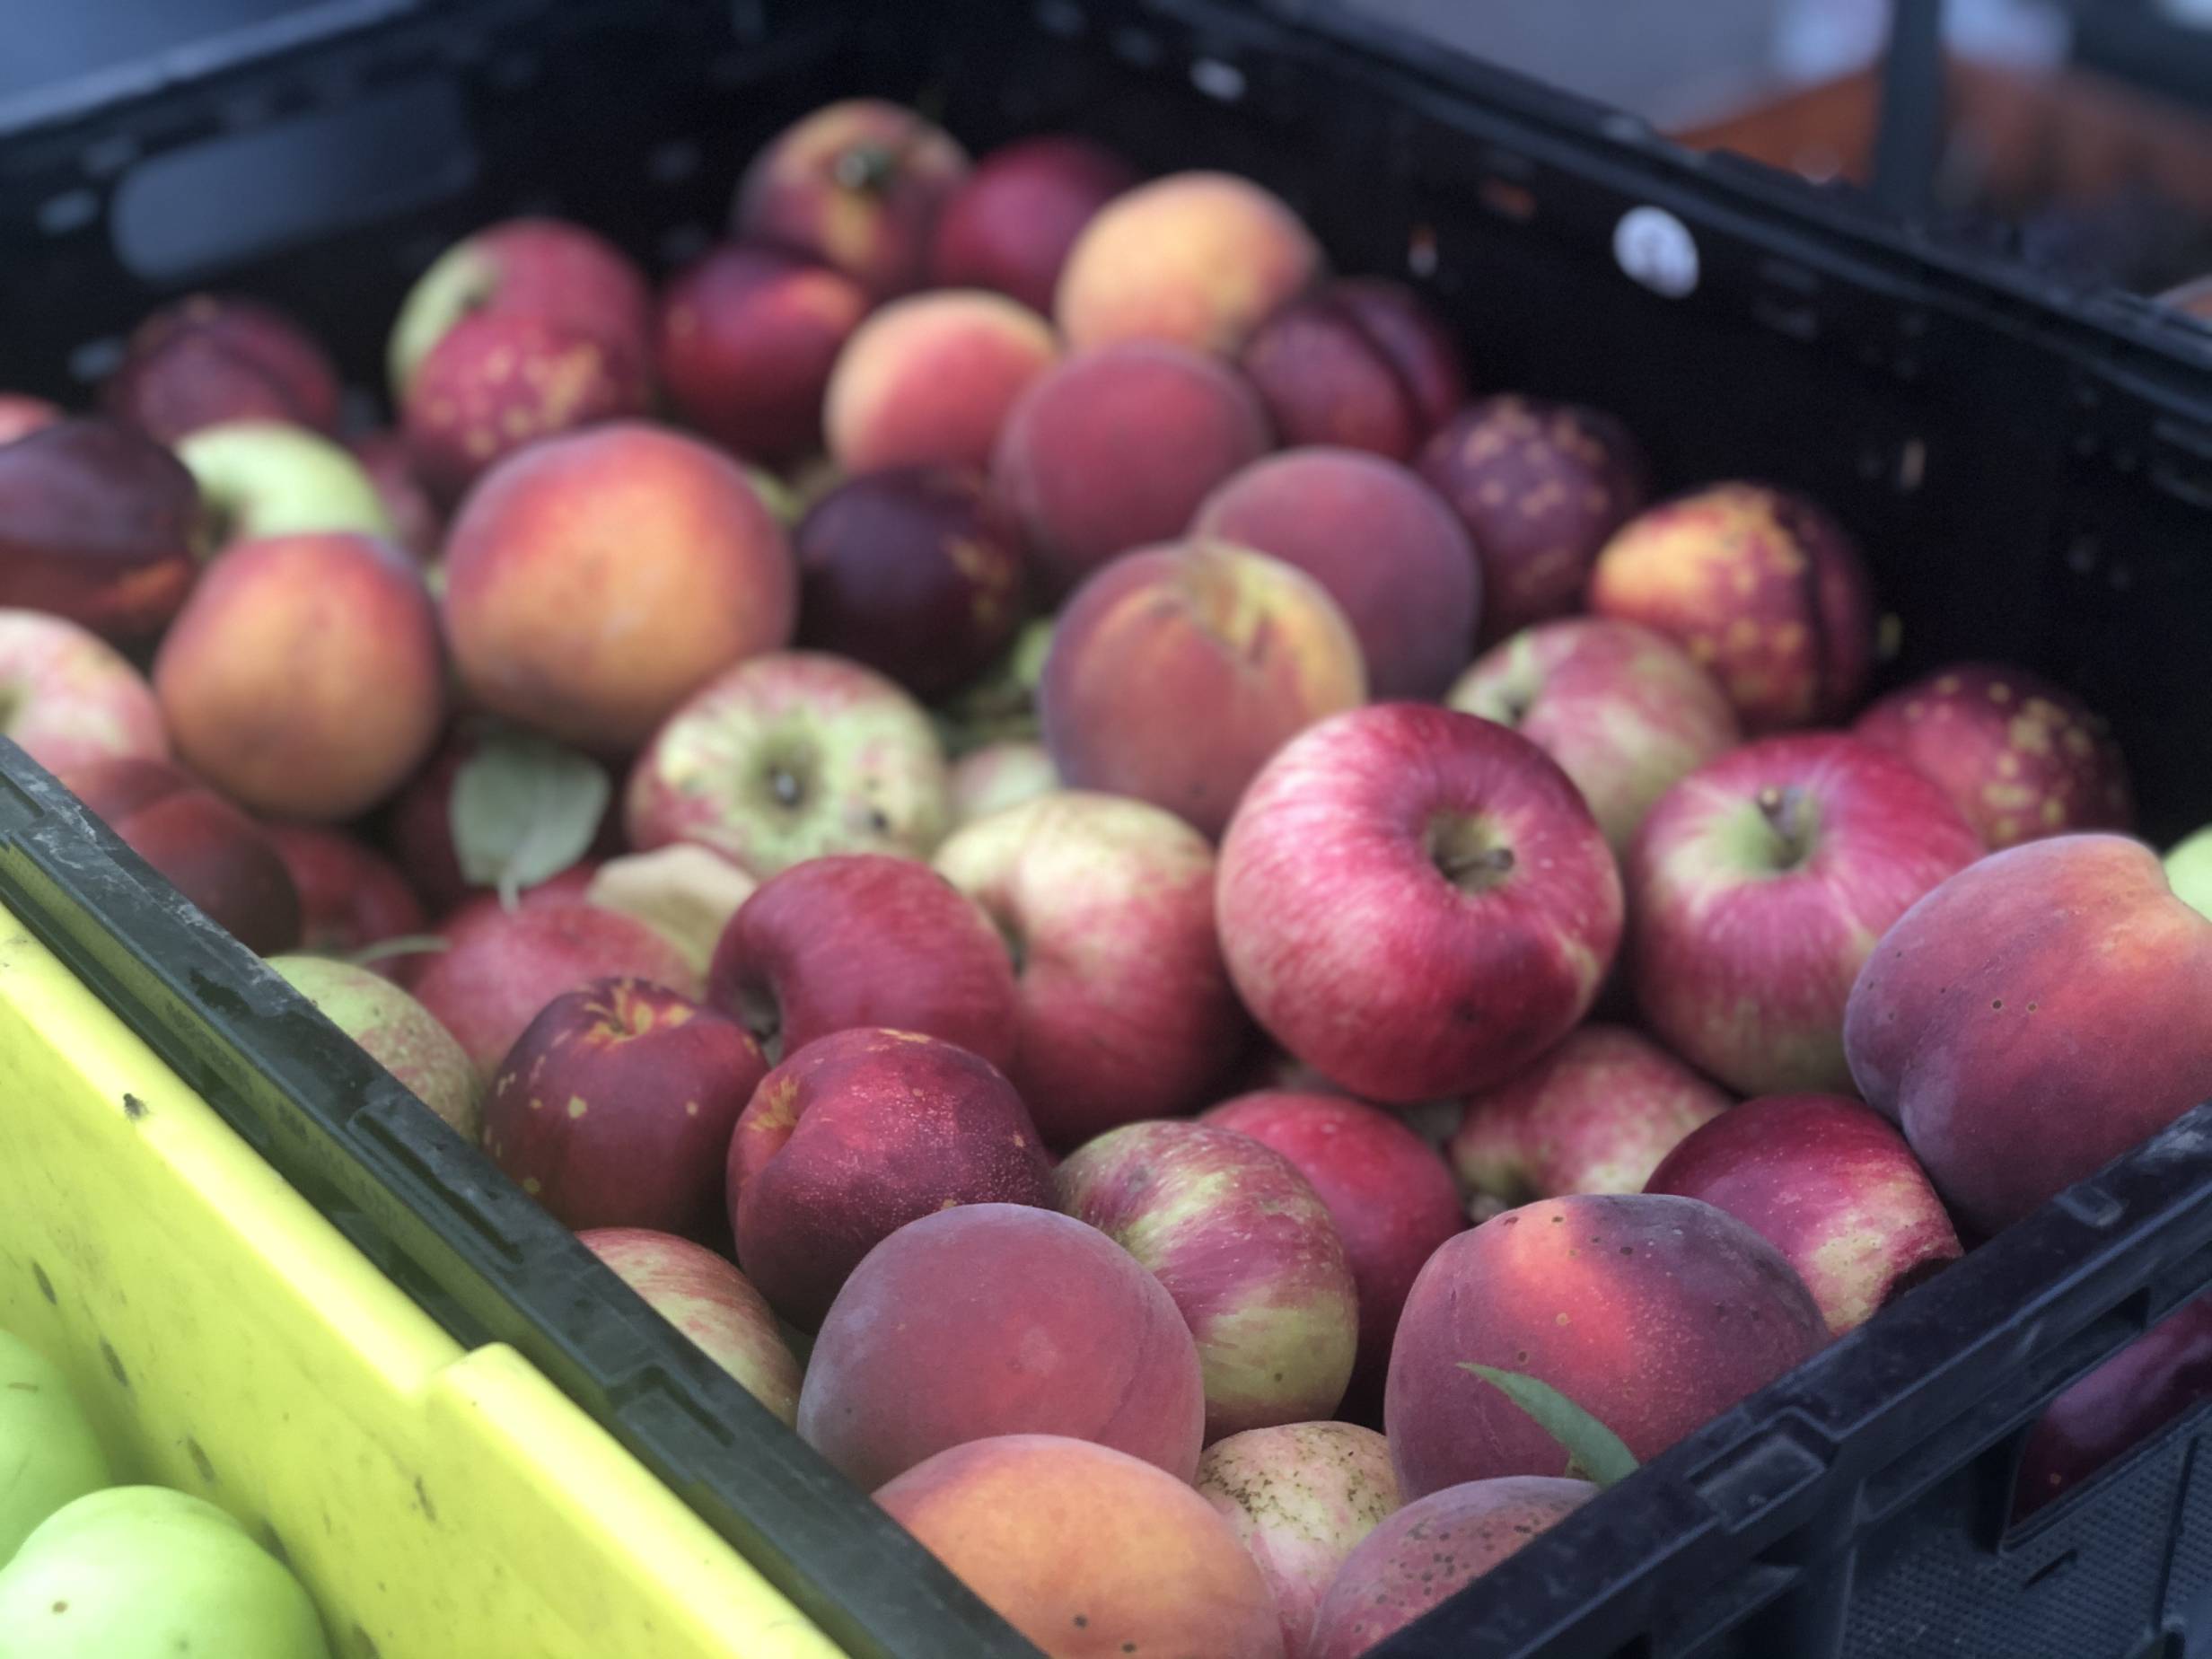 Small red apples sit in a large black container for sale at the Urbana Market in the Square. Photo by Alyssa Buckley.